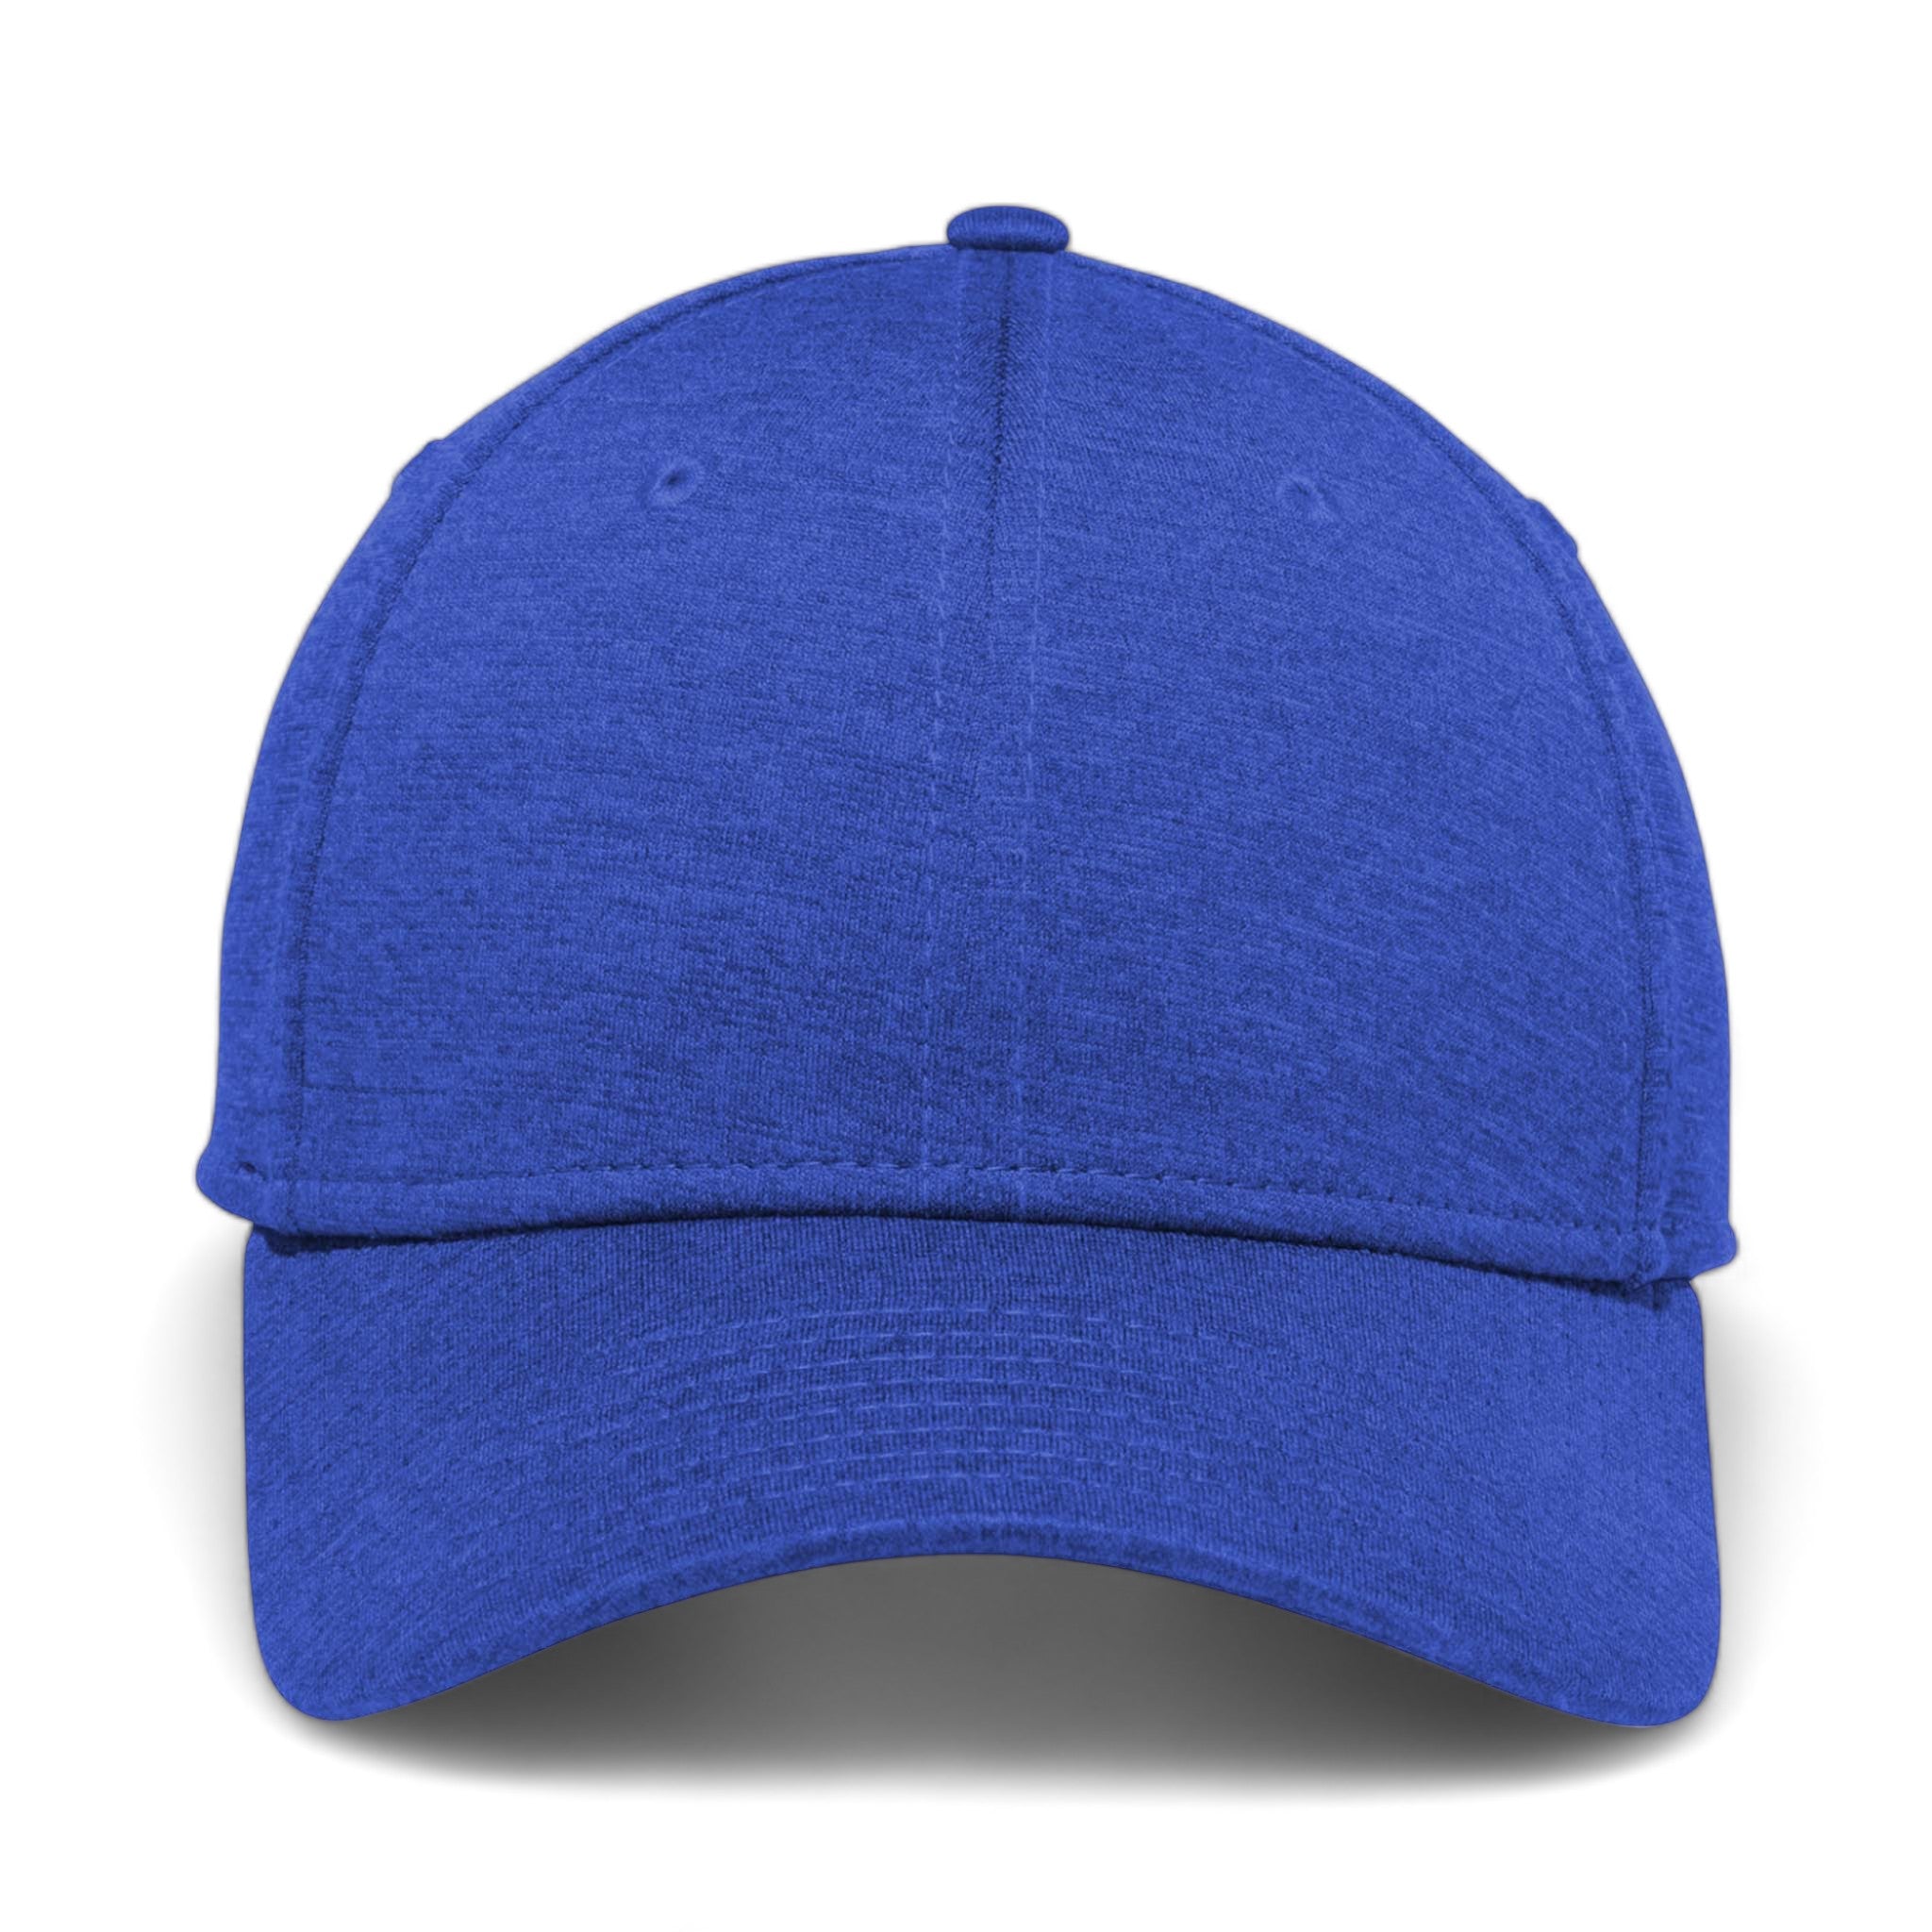 Front view of New Era NE703 custom hat in royal shadow heather